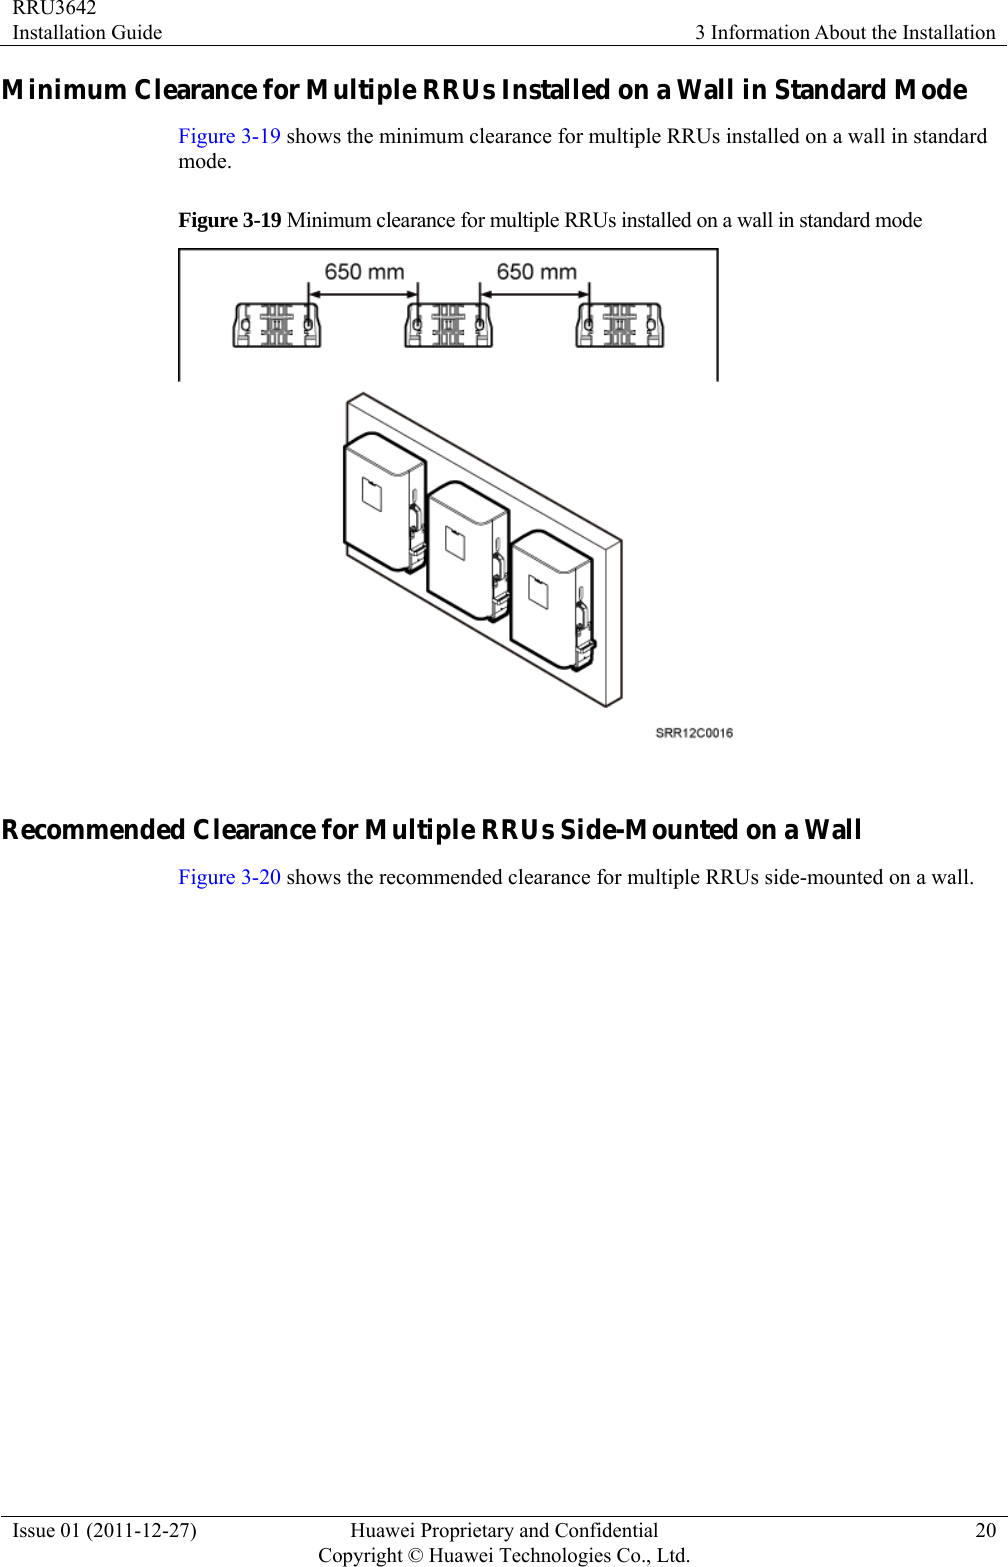 RRU3642 Installation Guide  3 Information About the Installation Issue 01 (2011-12-27)  Huawei Proprietary and Confidential         Copyright © Huawei Technologies Co., Ltd.20 Minimum Clearance for Multiple RRUs Installed on a Wall in Standard Mode Figure 3-19 shows the minimum clearance for multiple RRUs installed on a wall in standard mode. Figure 3-19 Minimum clearance for multiple RRUs installed on a wall in standard mode   Recommended Clearance for Multiple RRUs Side-Mounted on a Wall Figure 3-20 shows the recommended clearance for multiple RRUs side-mounted on a wall.   